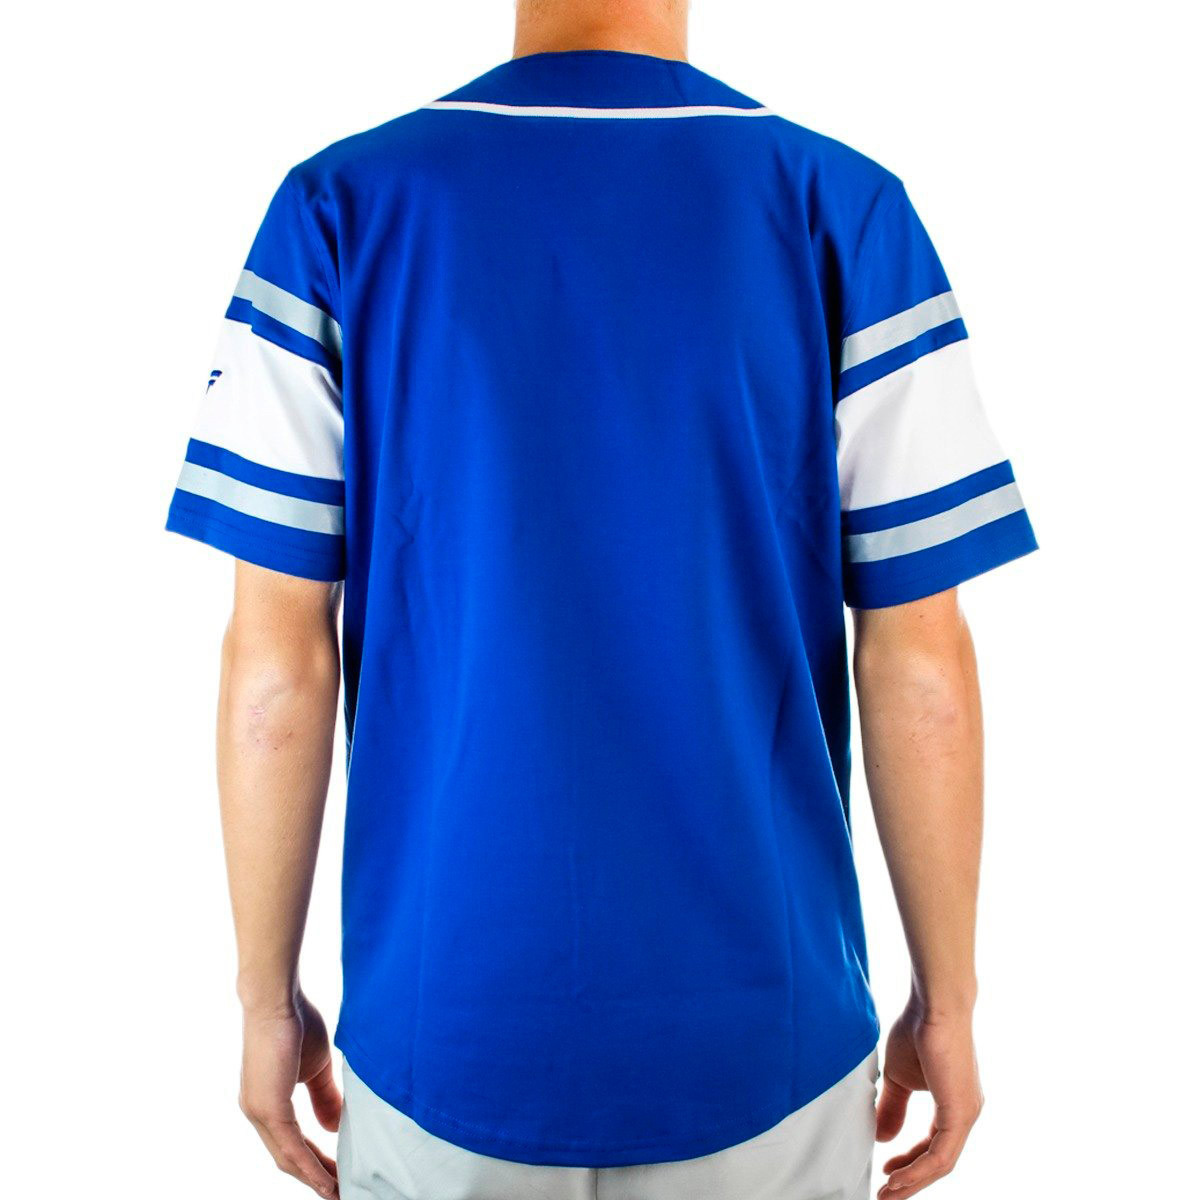 Iconic Supporters Cotton Jersey Shirt Los Angeles Dodgers 